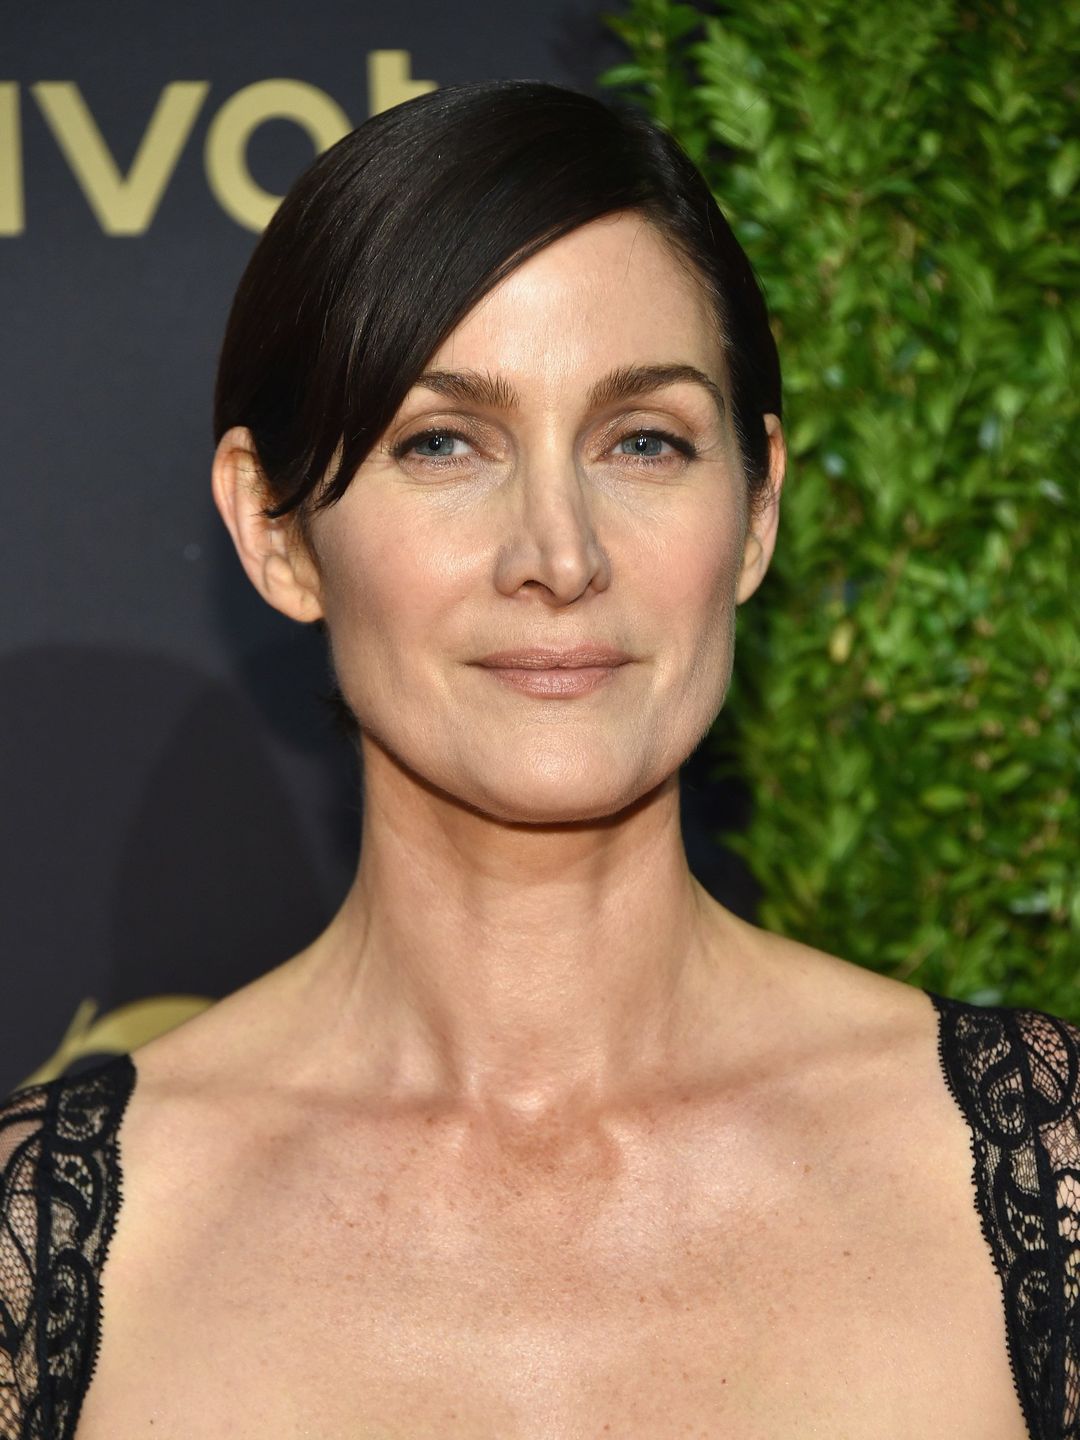 Carrie-Anne Moss early career